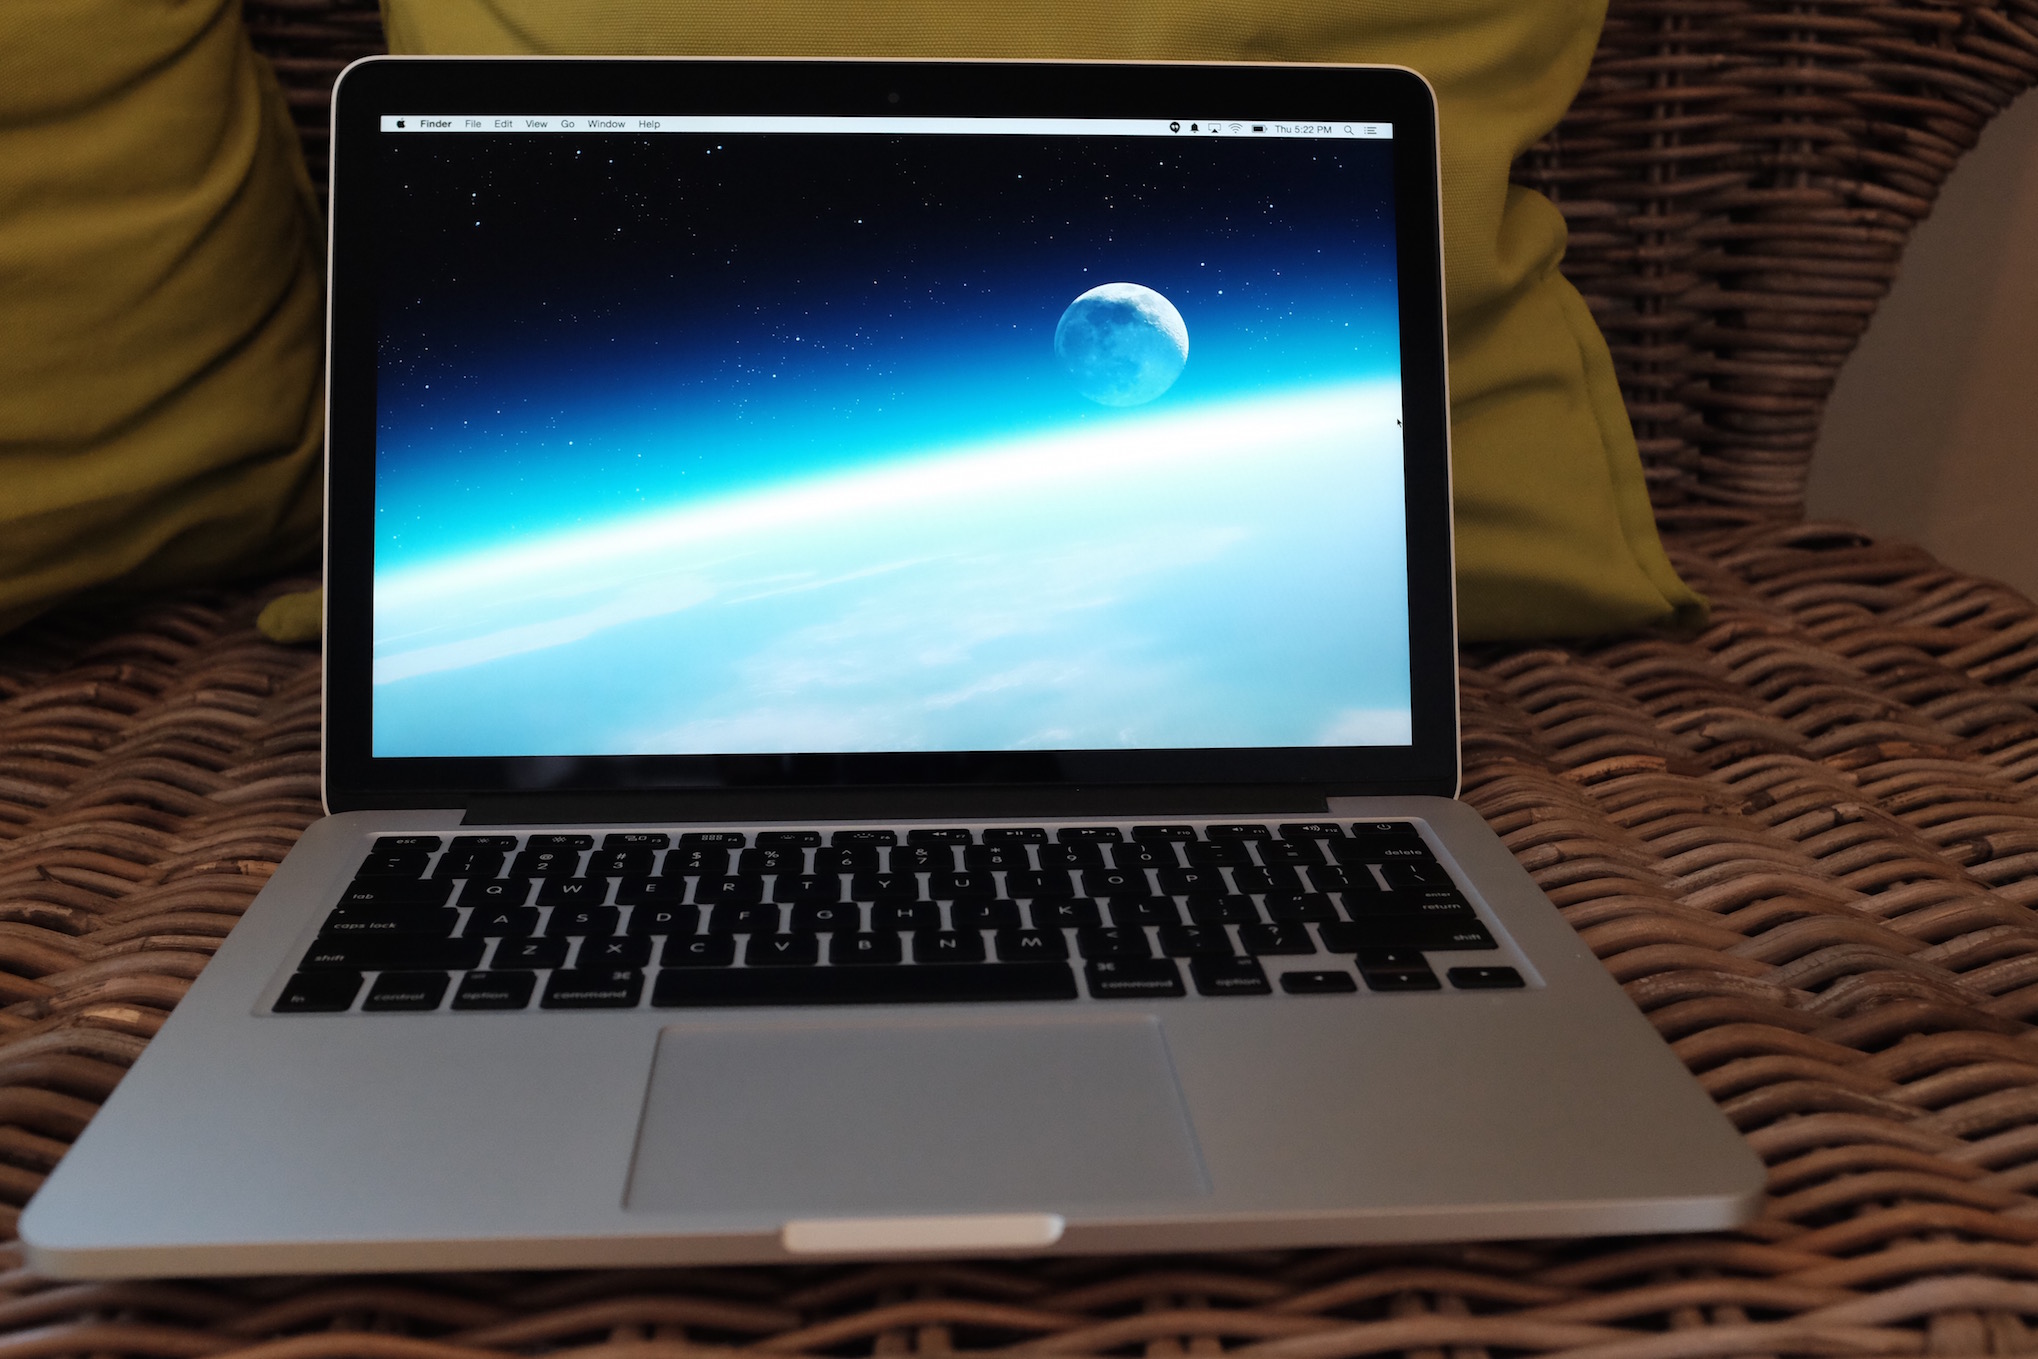 Could 13-inch MacBook Pro Retina Display with Force Touch trackpad be